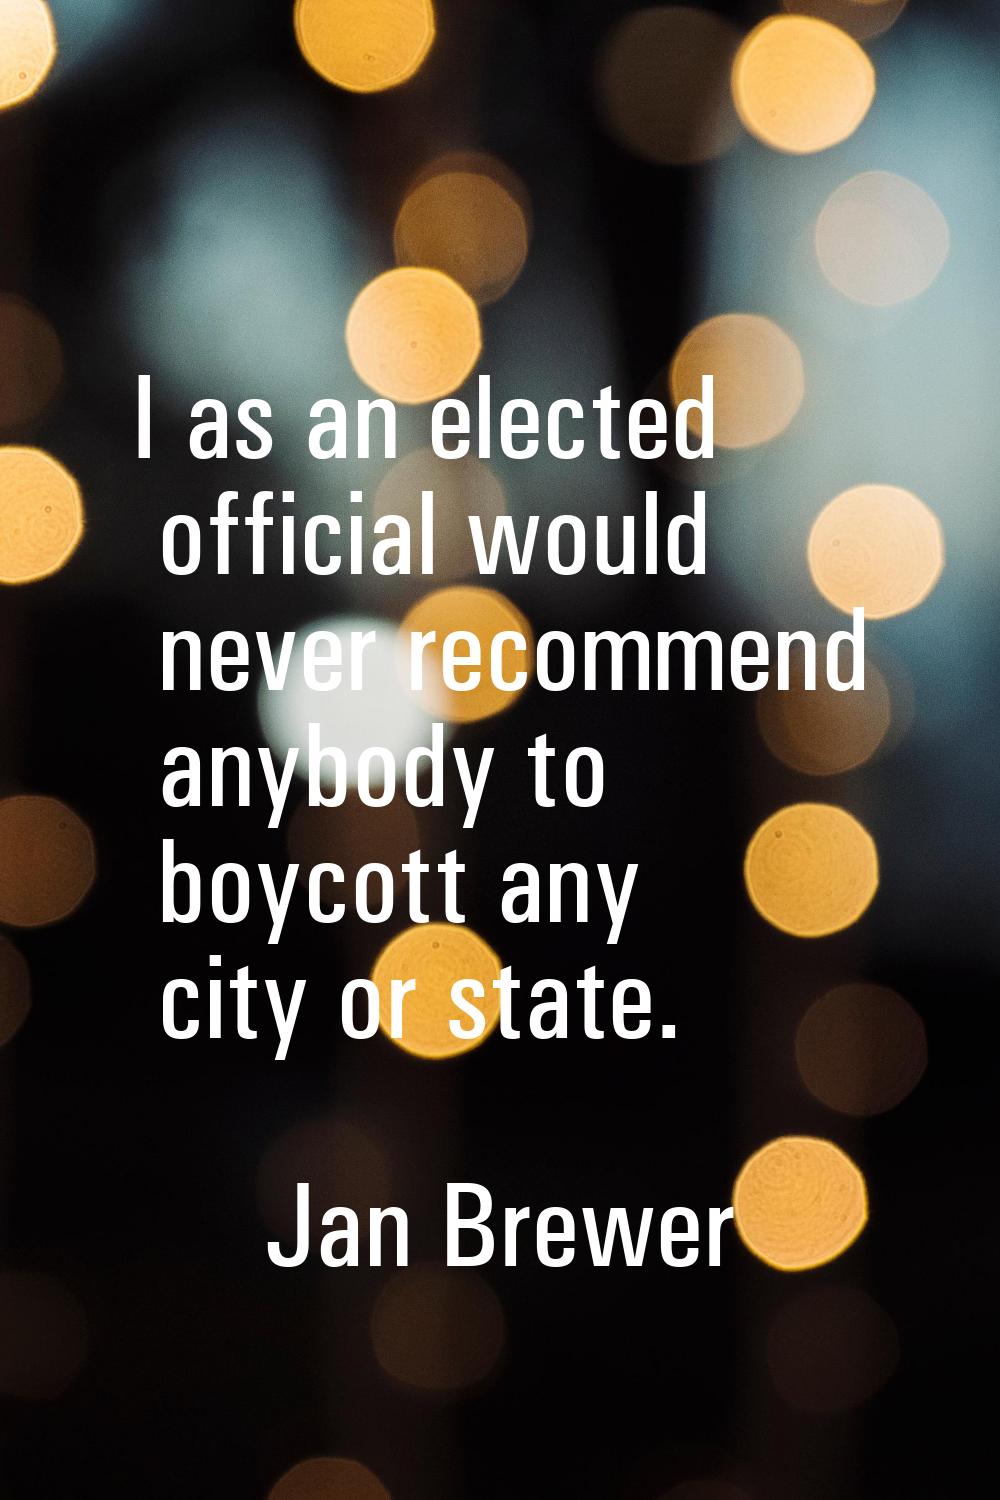 I as an elected official would never recommend anybody to boycott any city or state.